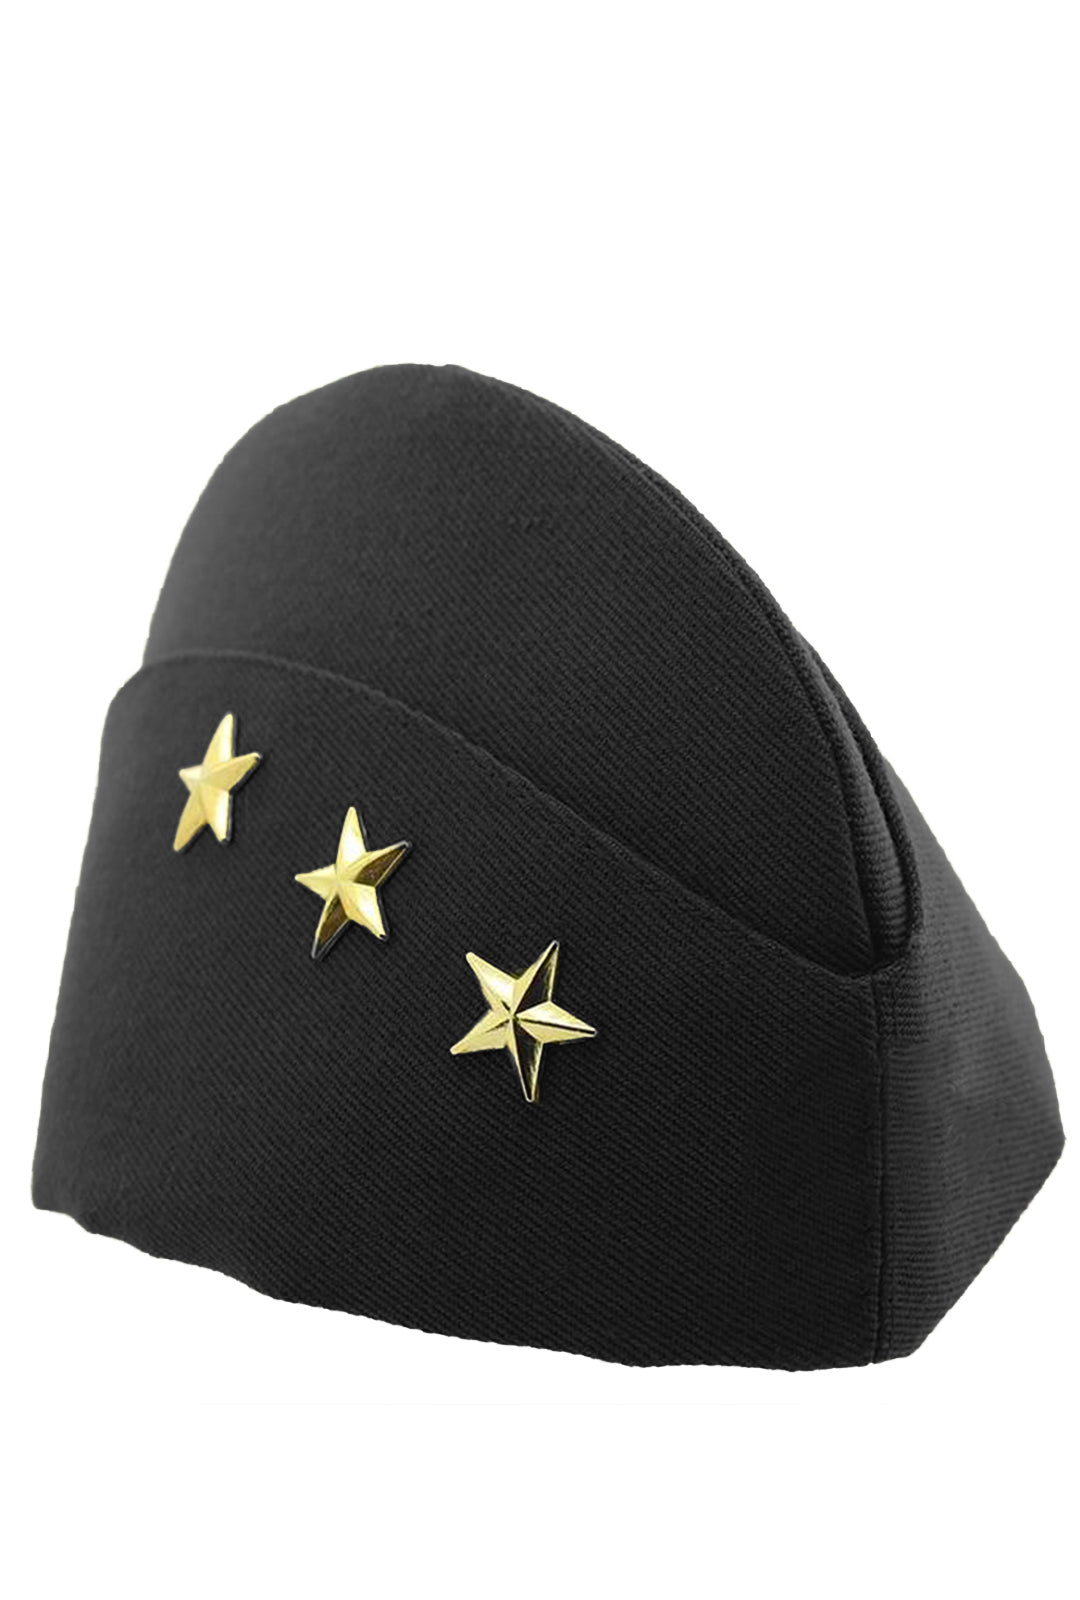 Black and Gold Stars Side Cap